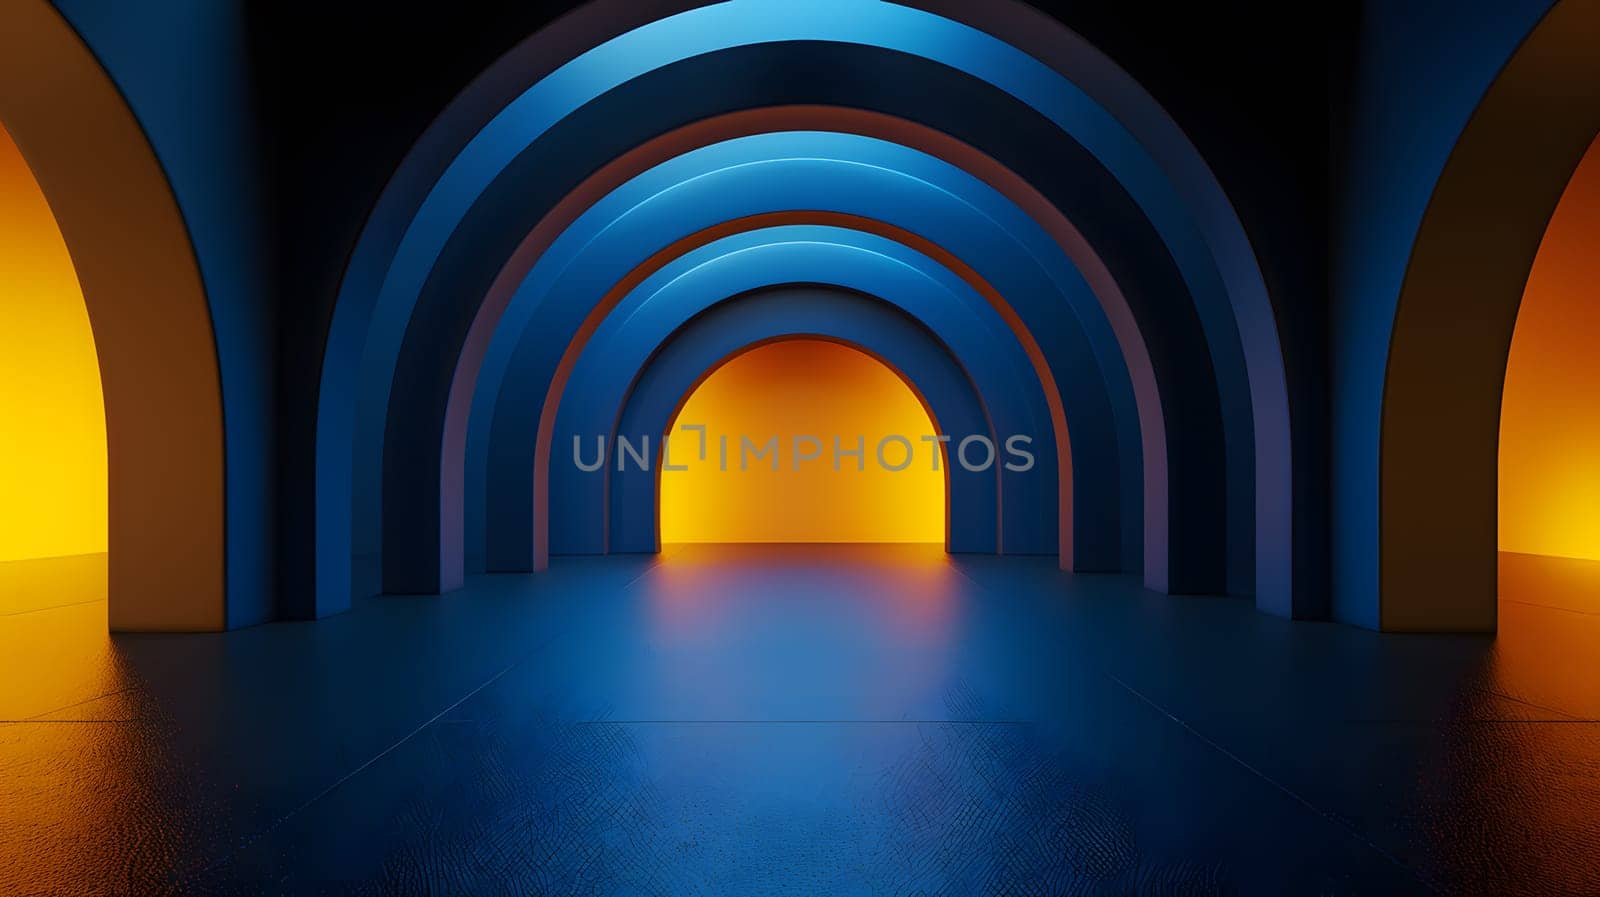 A tunnel with symmetrical arches in hues of electric blue and orange, leading to a bright light at the end. The pattern of the arches creates a parallel road of contrasting tints and shades